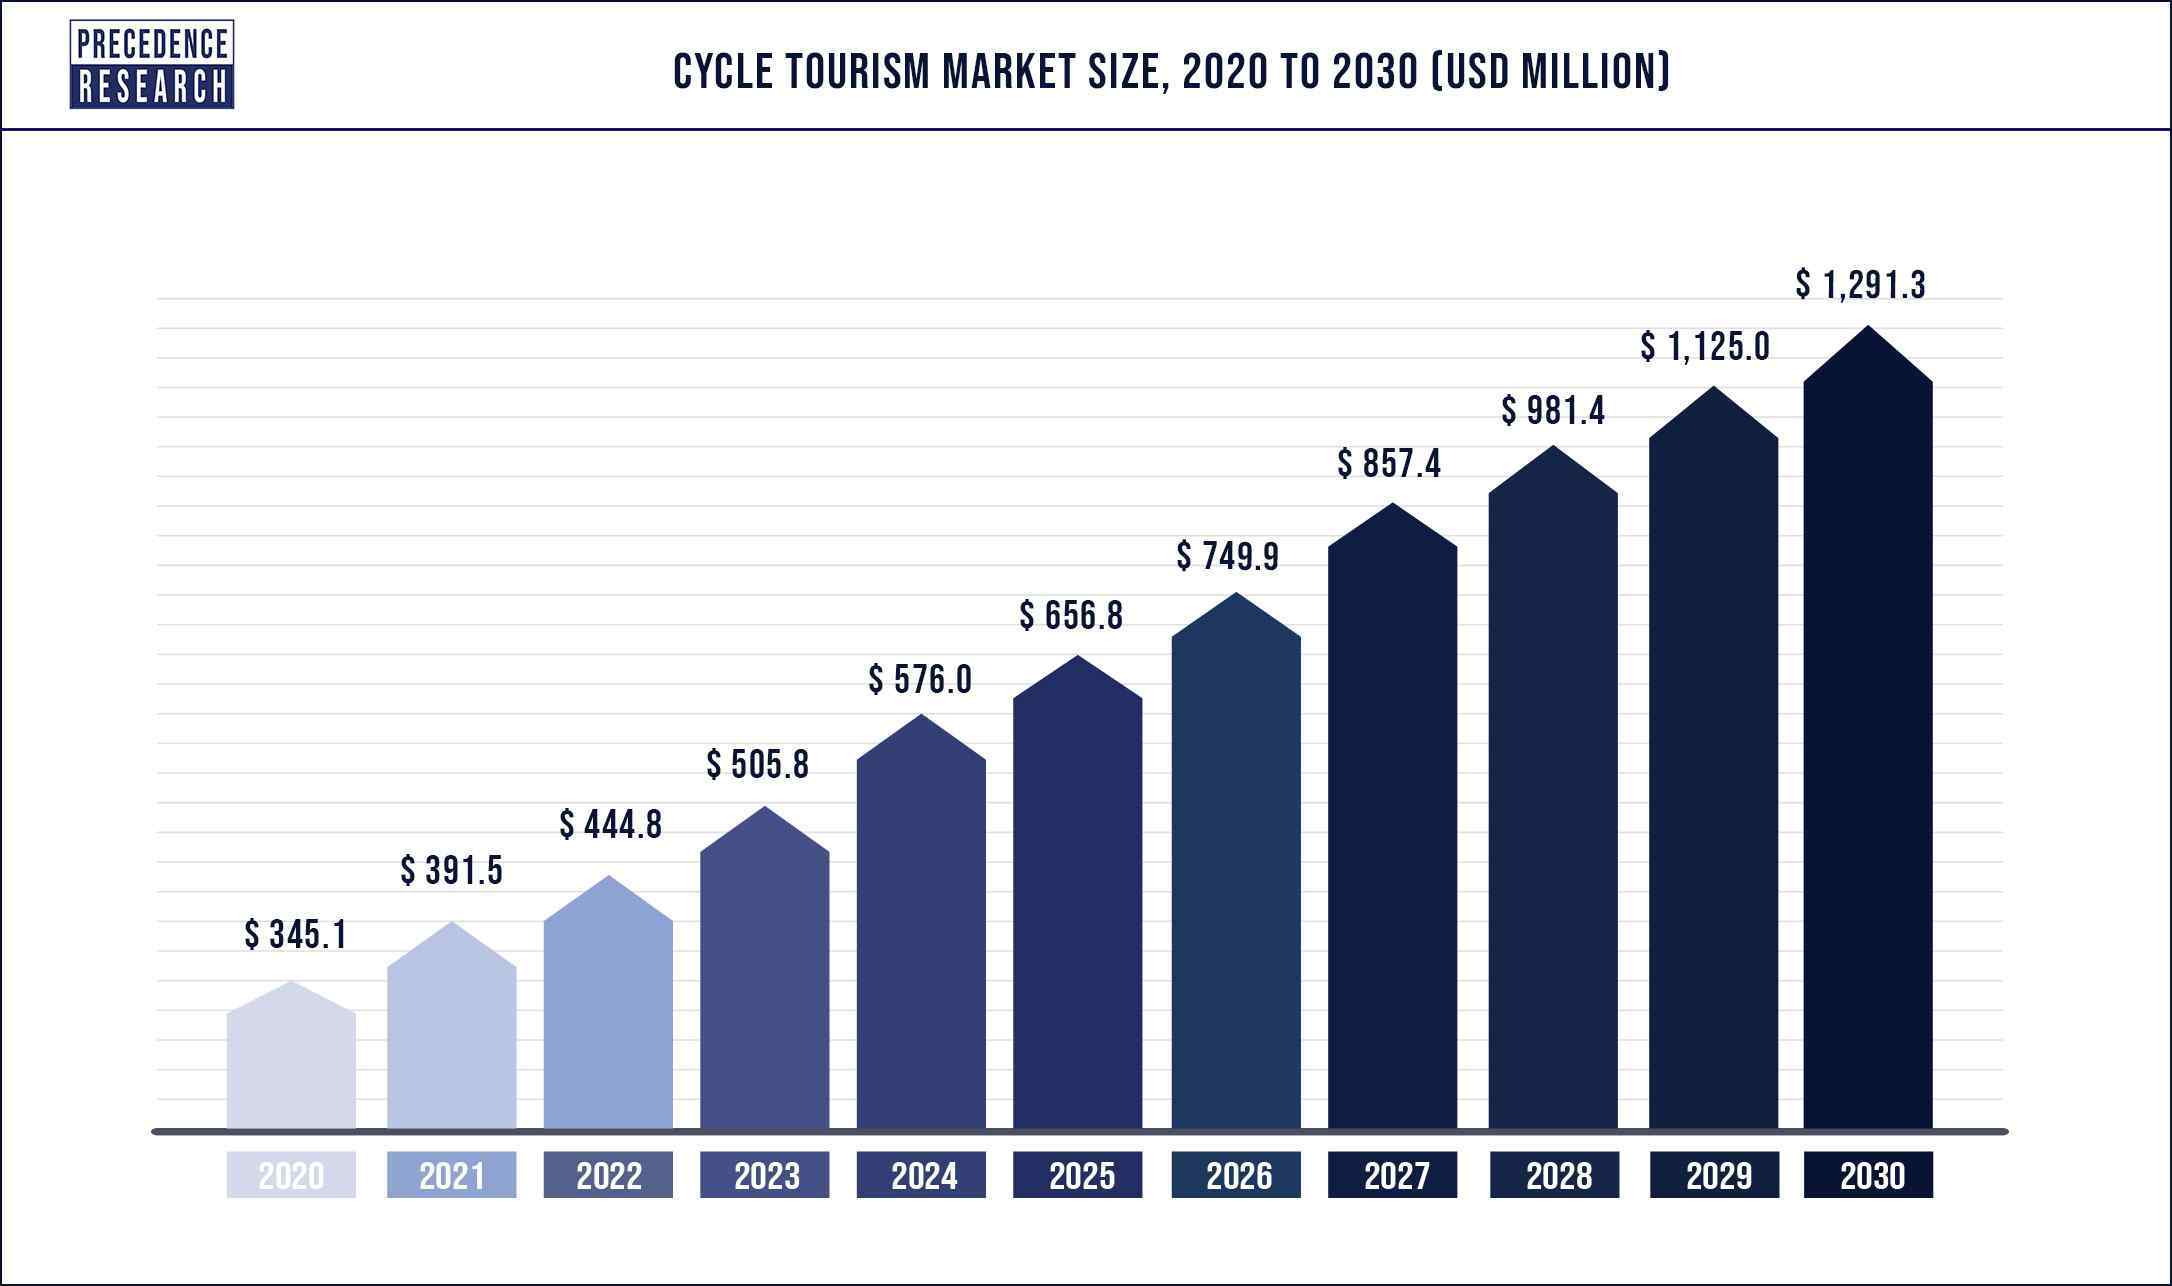 Cycle Tourism Market Size 2020 to 2030